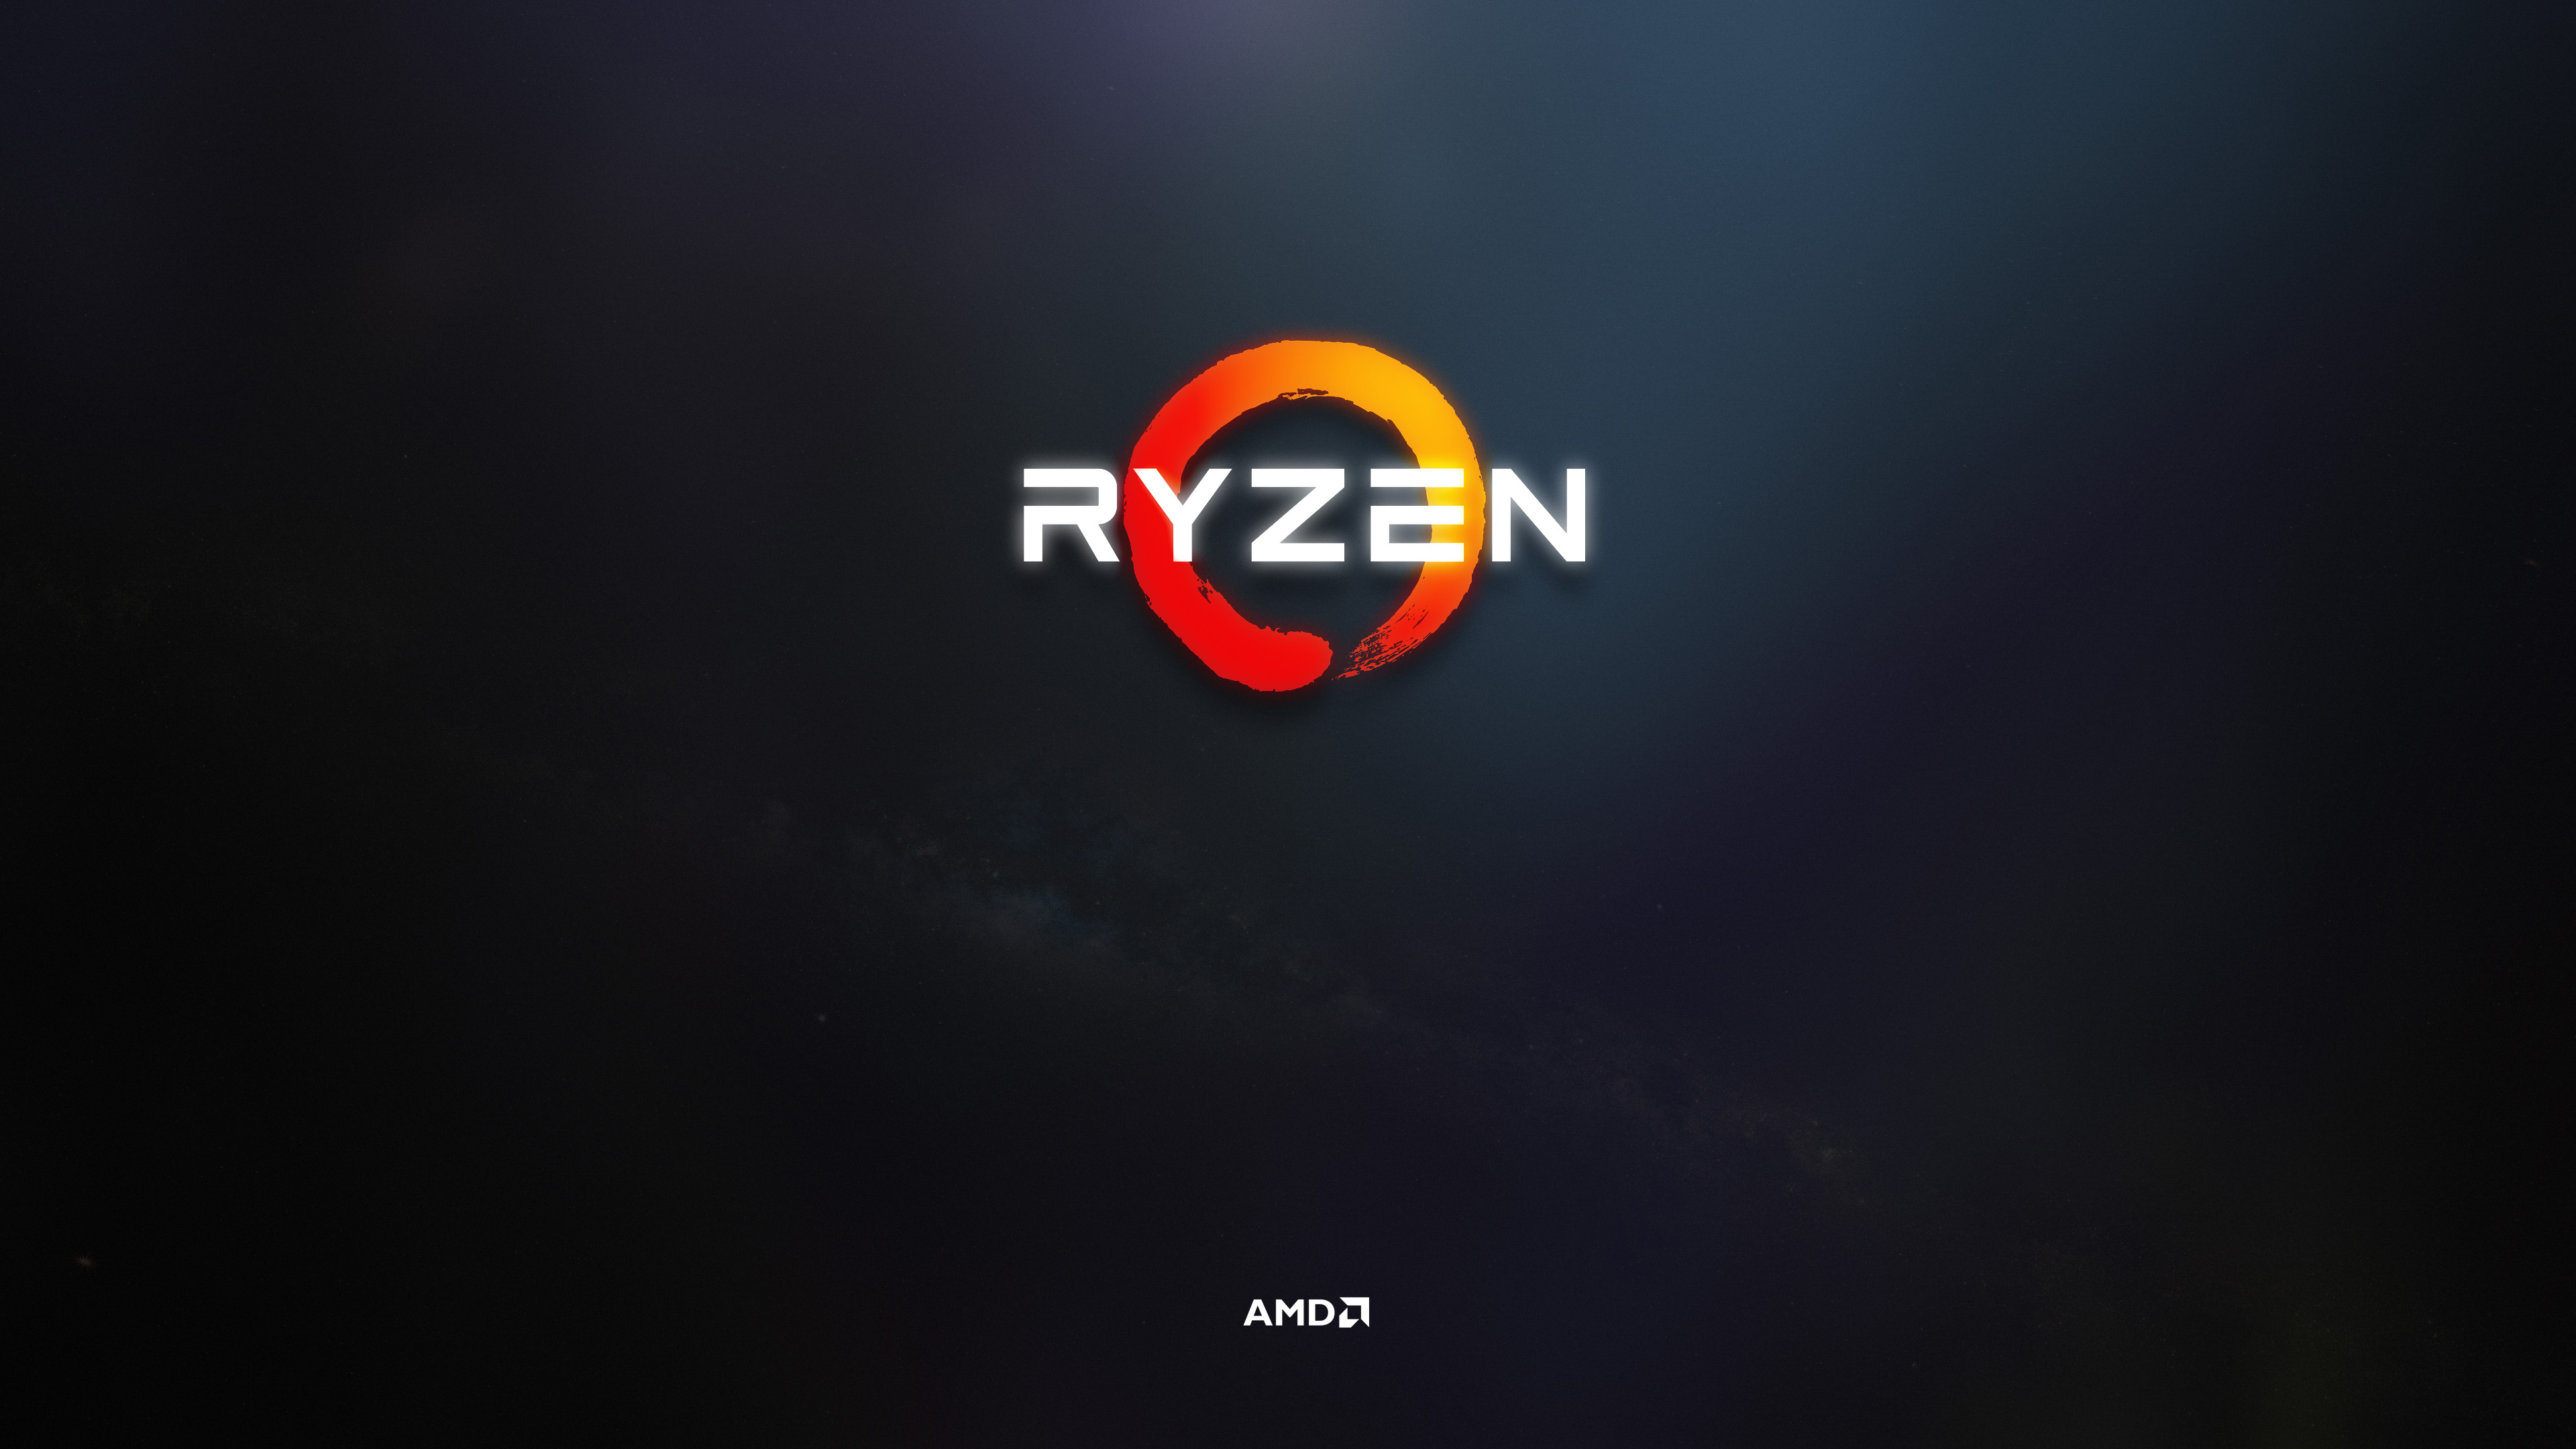 I couldn't find a simple, minimalistic, Ryzen wallpaper that I liked, so I made it myself!